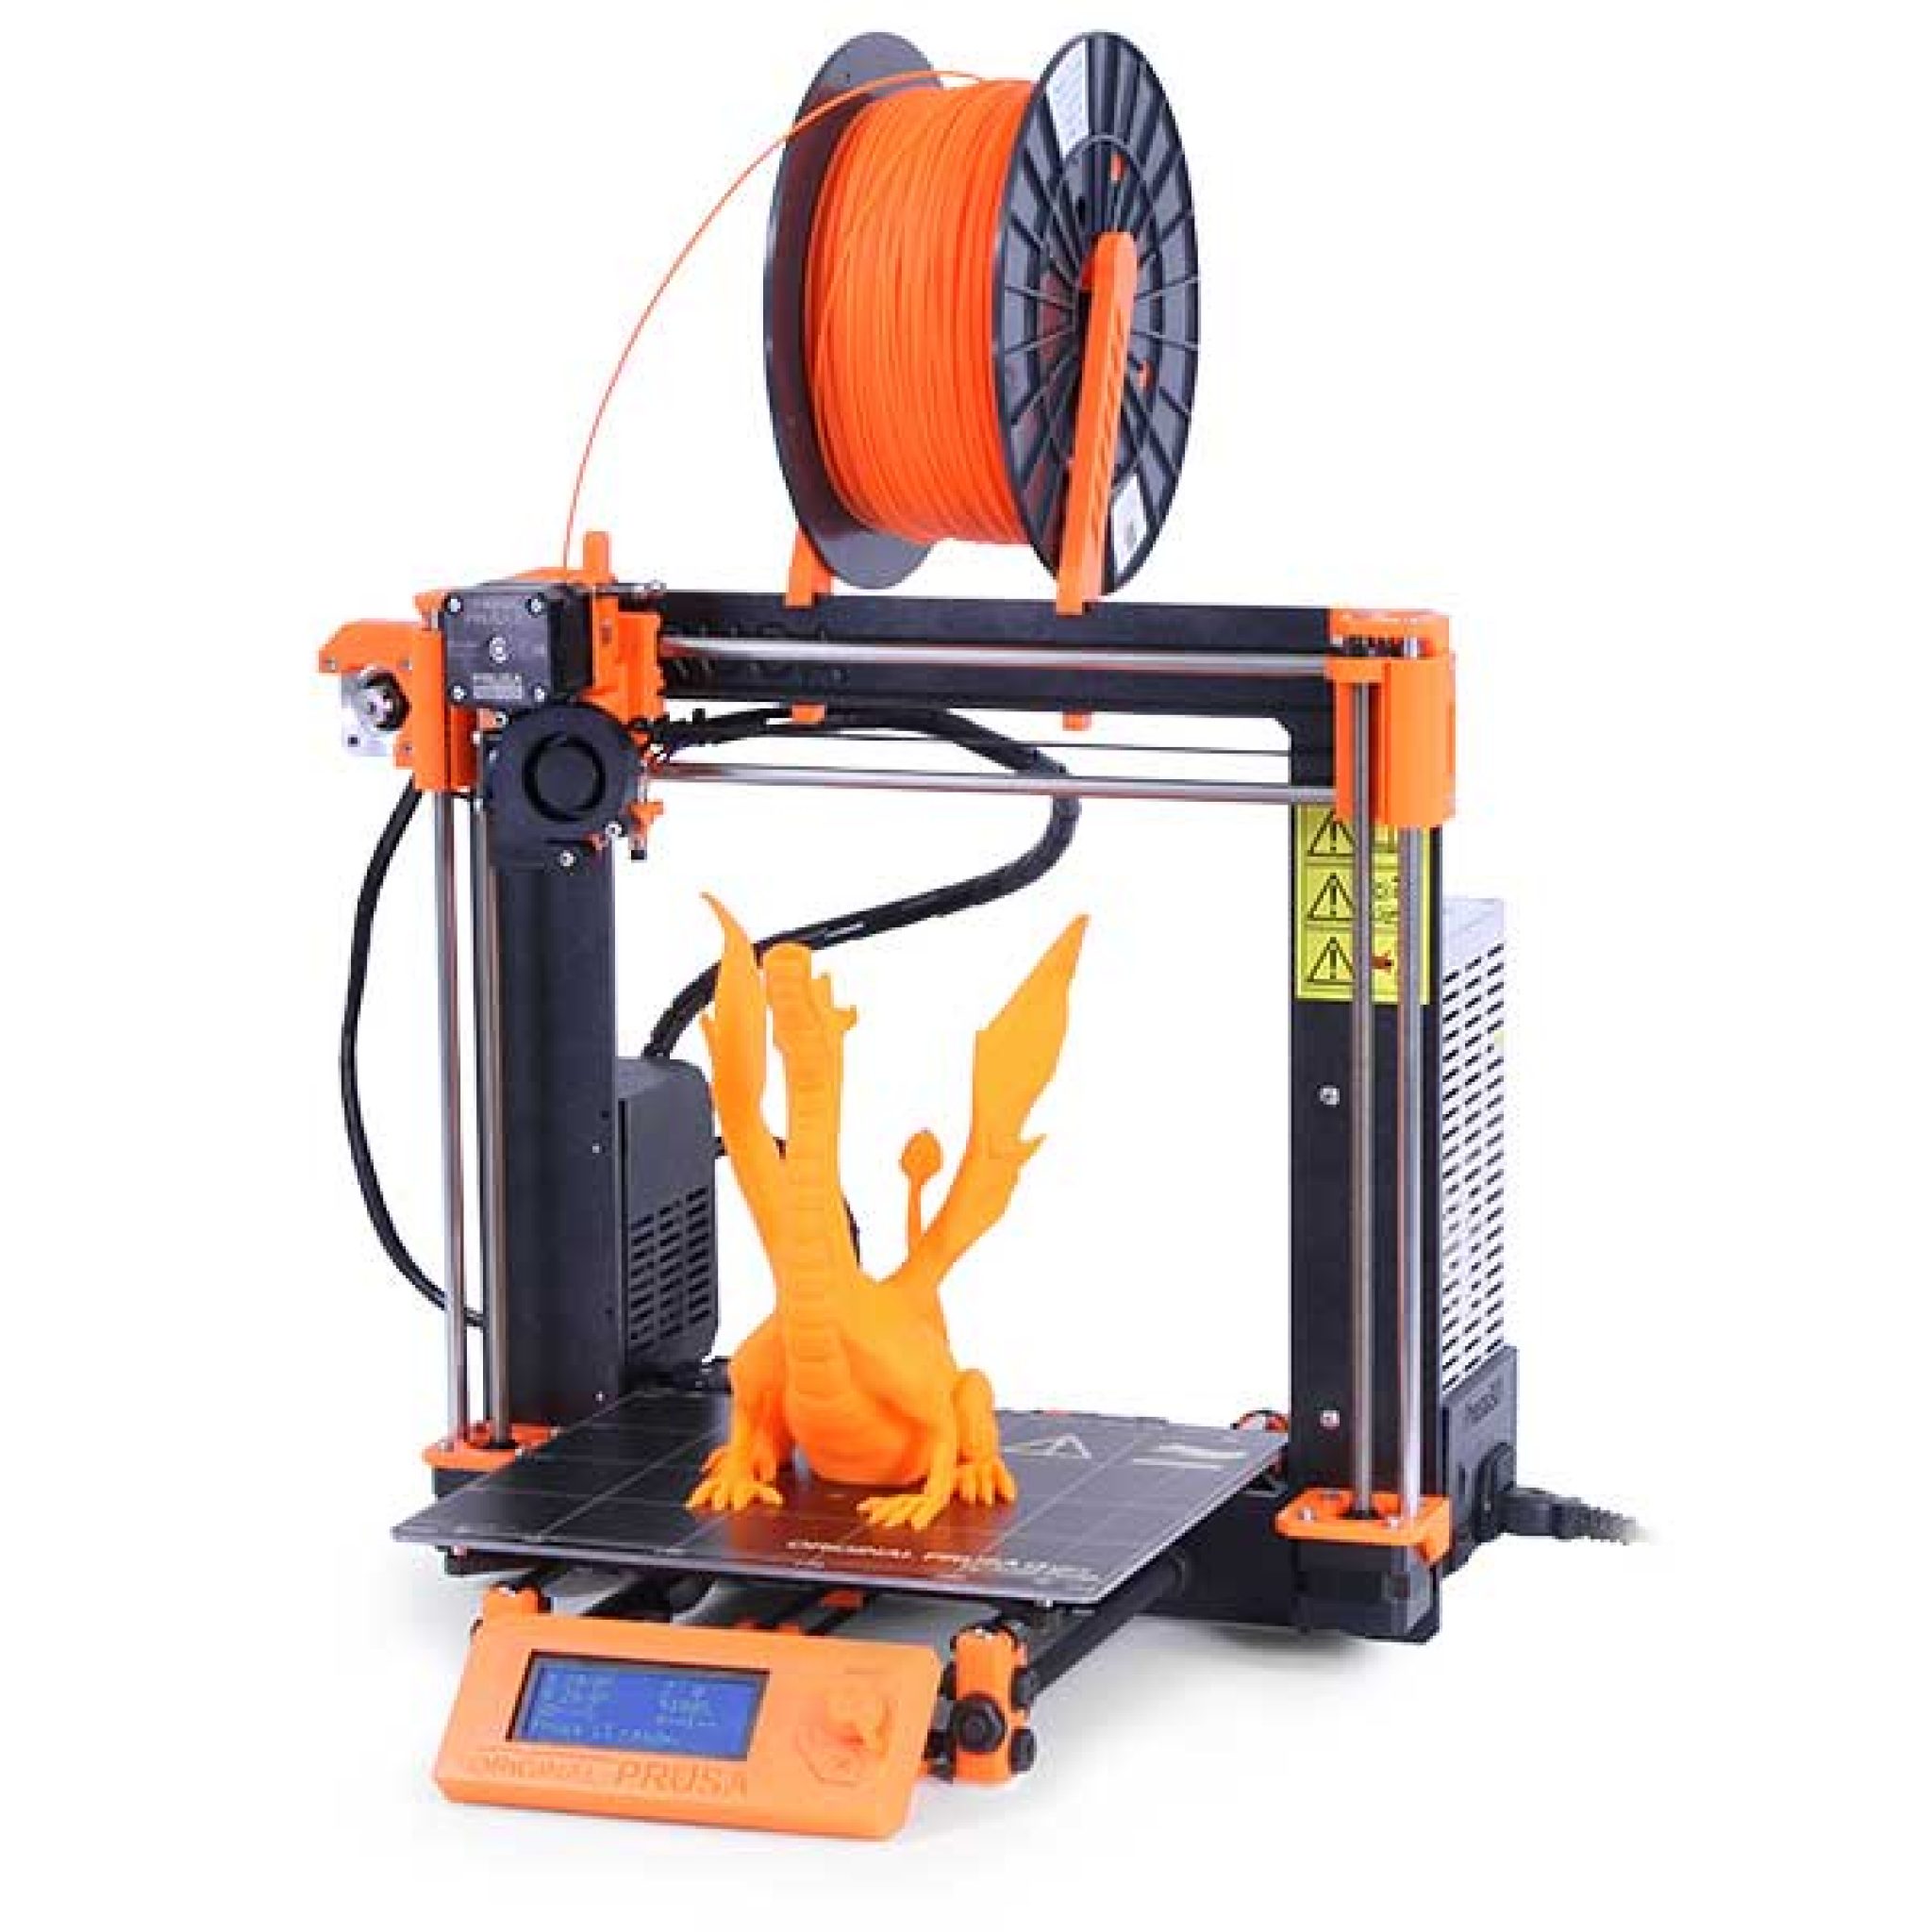 15 Best High Resolution 3D Printers Buying Guide of 2021 - 3D Printer Prusa Research Original Prusa I3 MK2S AssembleD Perspective 2048x2048